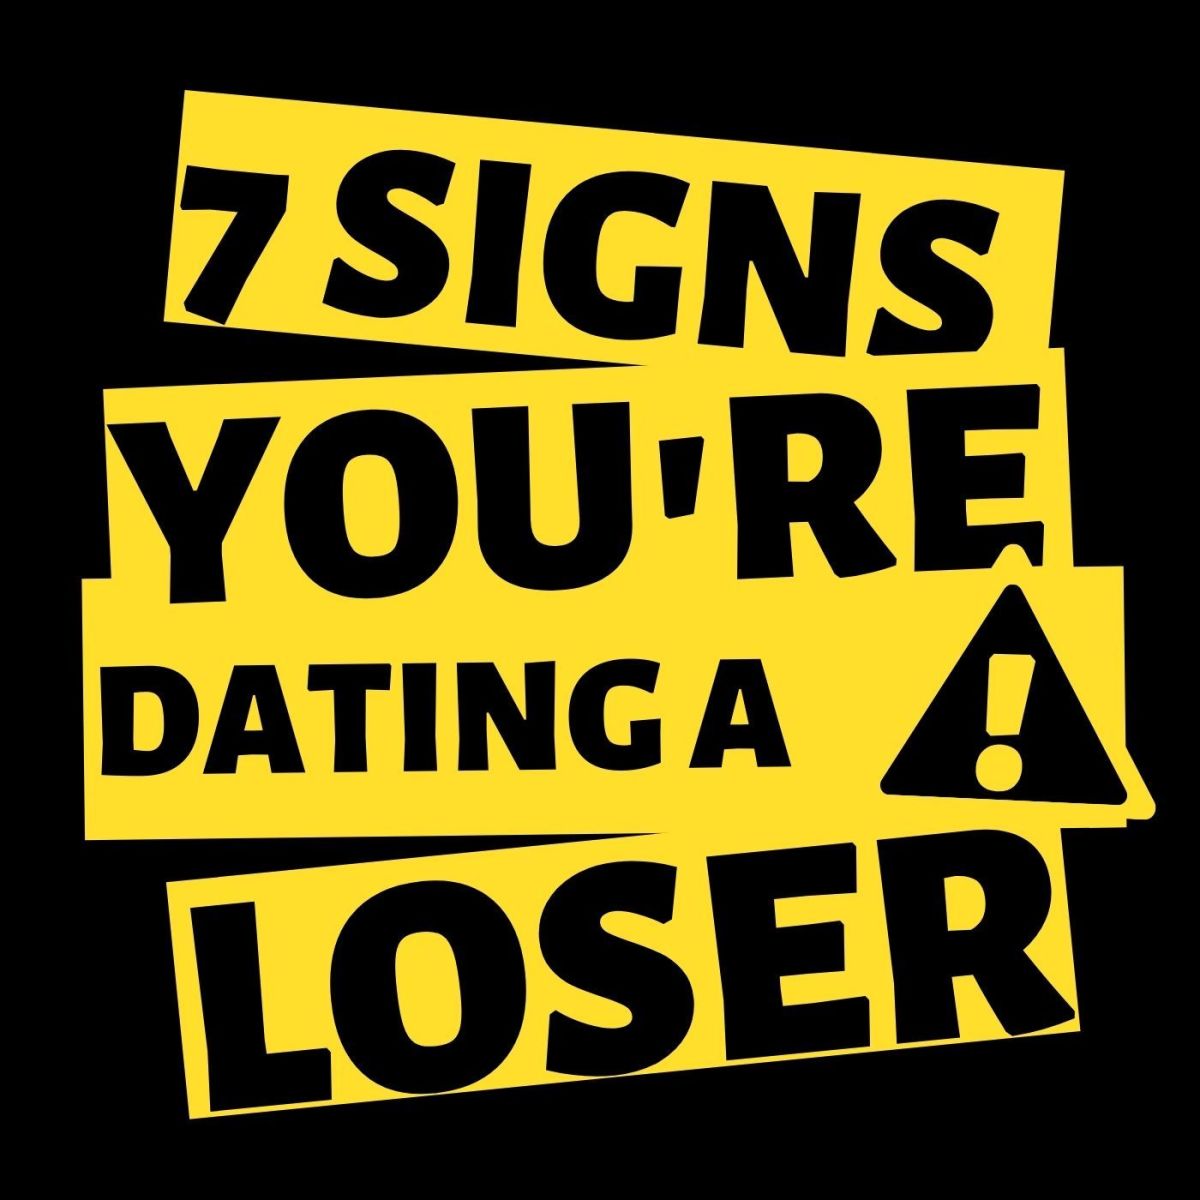 7 Signs You’re Dating a Loser